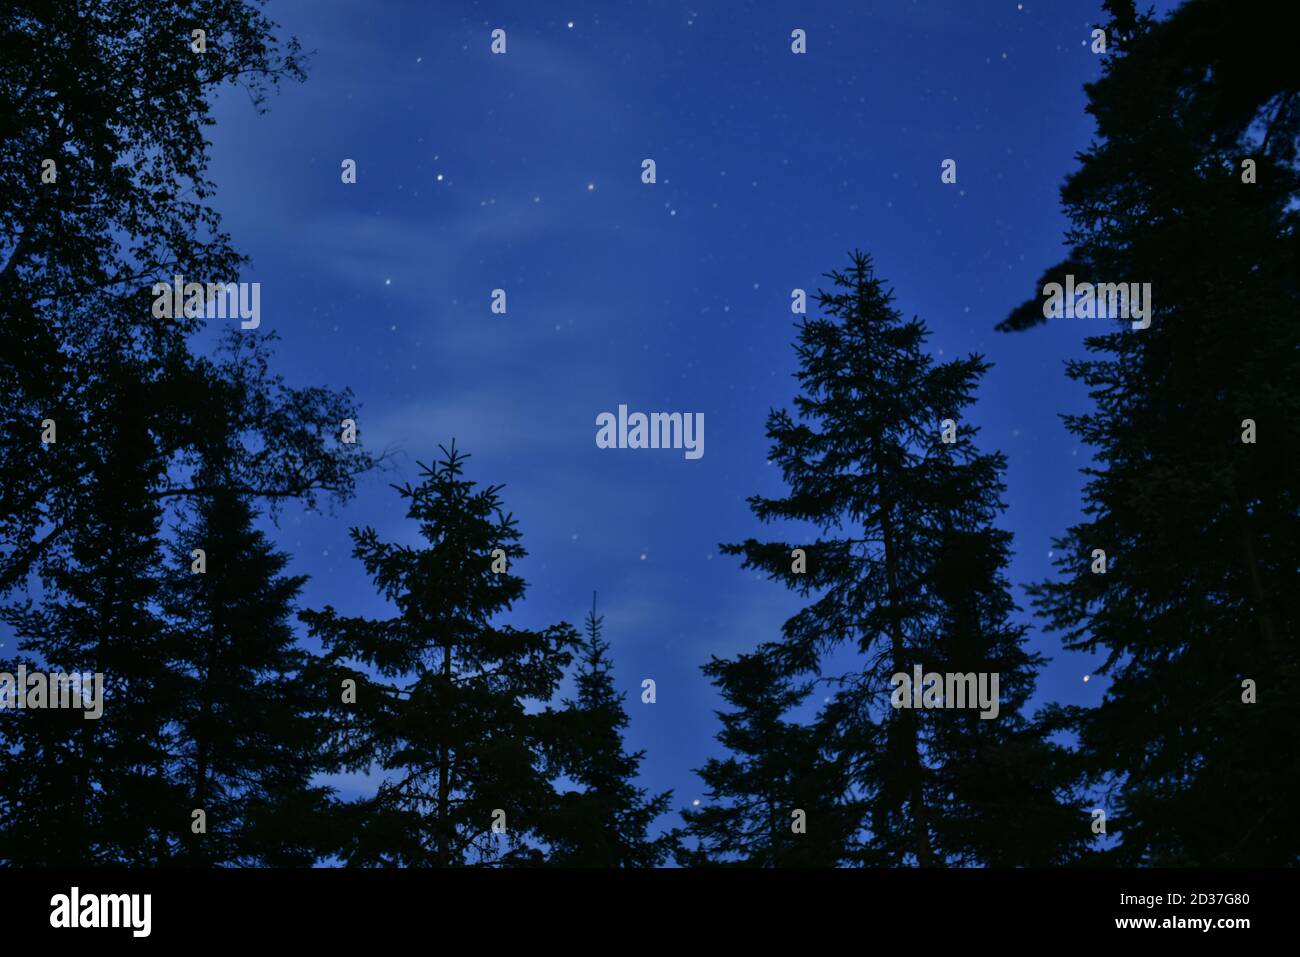 Silhouette of Black Spruce trees against the evening sky, with stars and light cloud formations Stock Photo